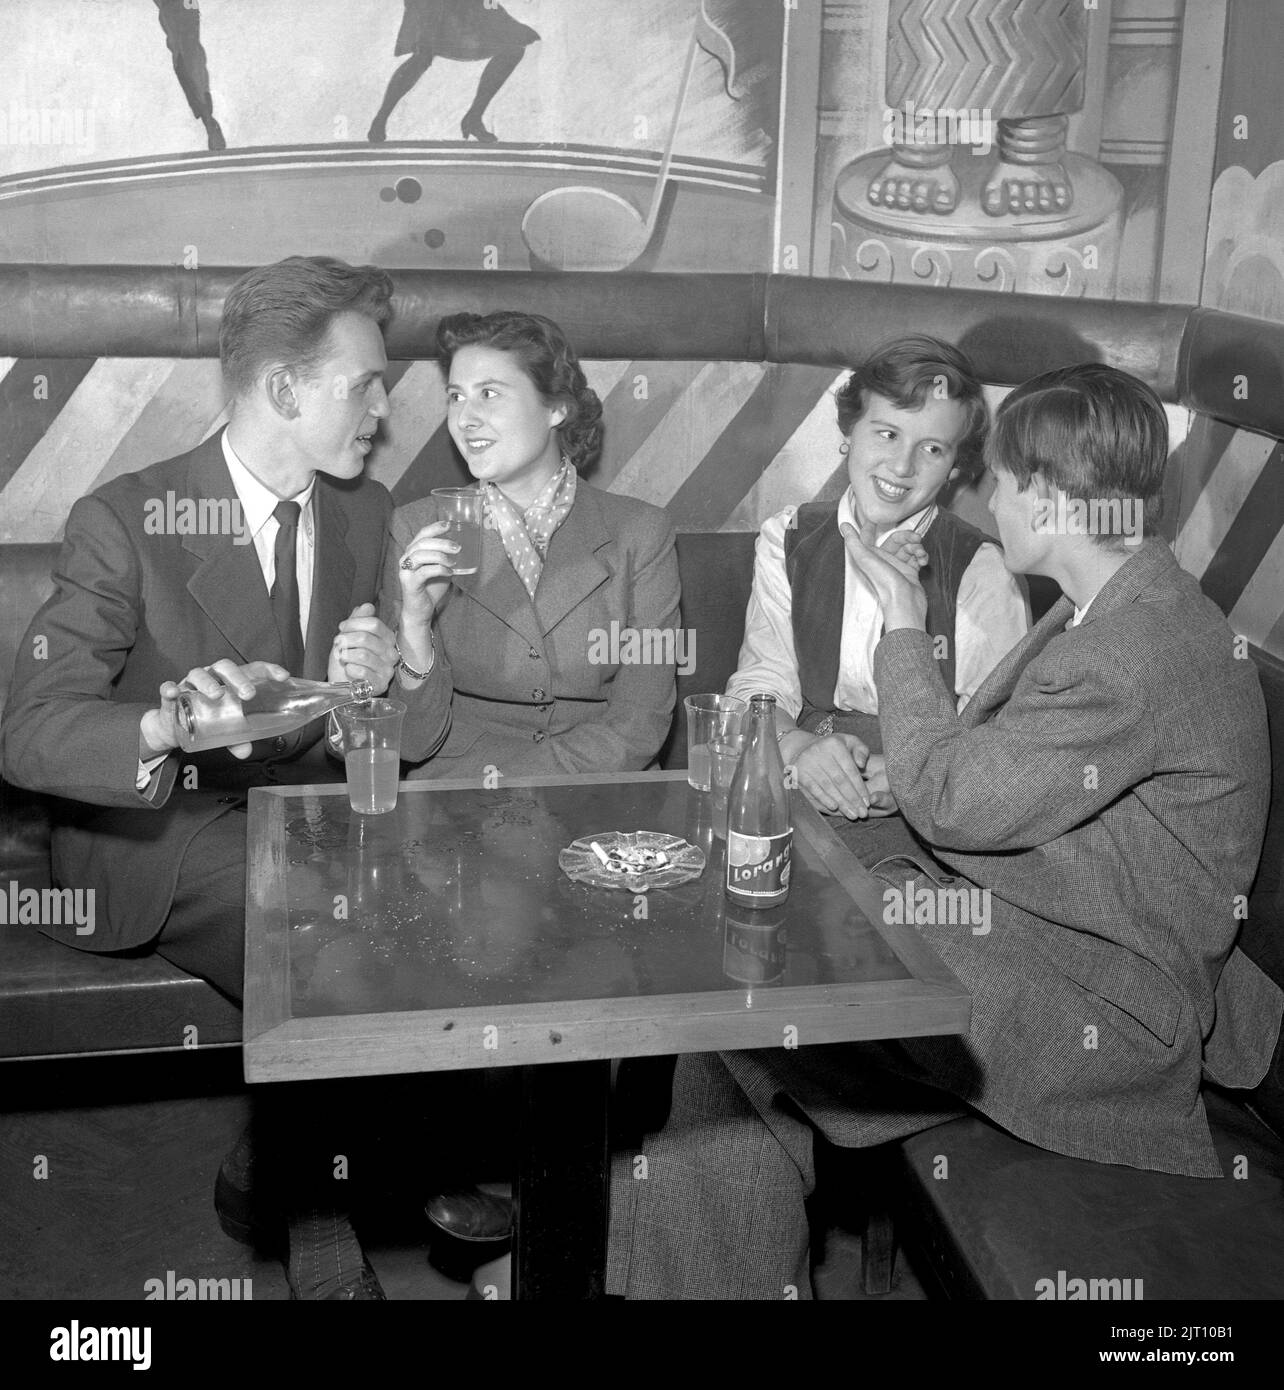 In the 1950s. Two young couples in the bar at Nalen dance establishment in Stockholm that at the time did not allow alcoholic beverages. Smoking however is ok. Sweden 1951 Conard ref 1871 Stock Photo